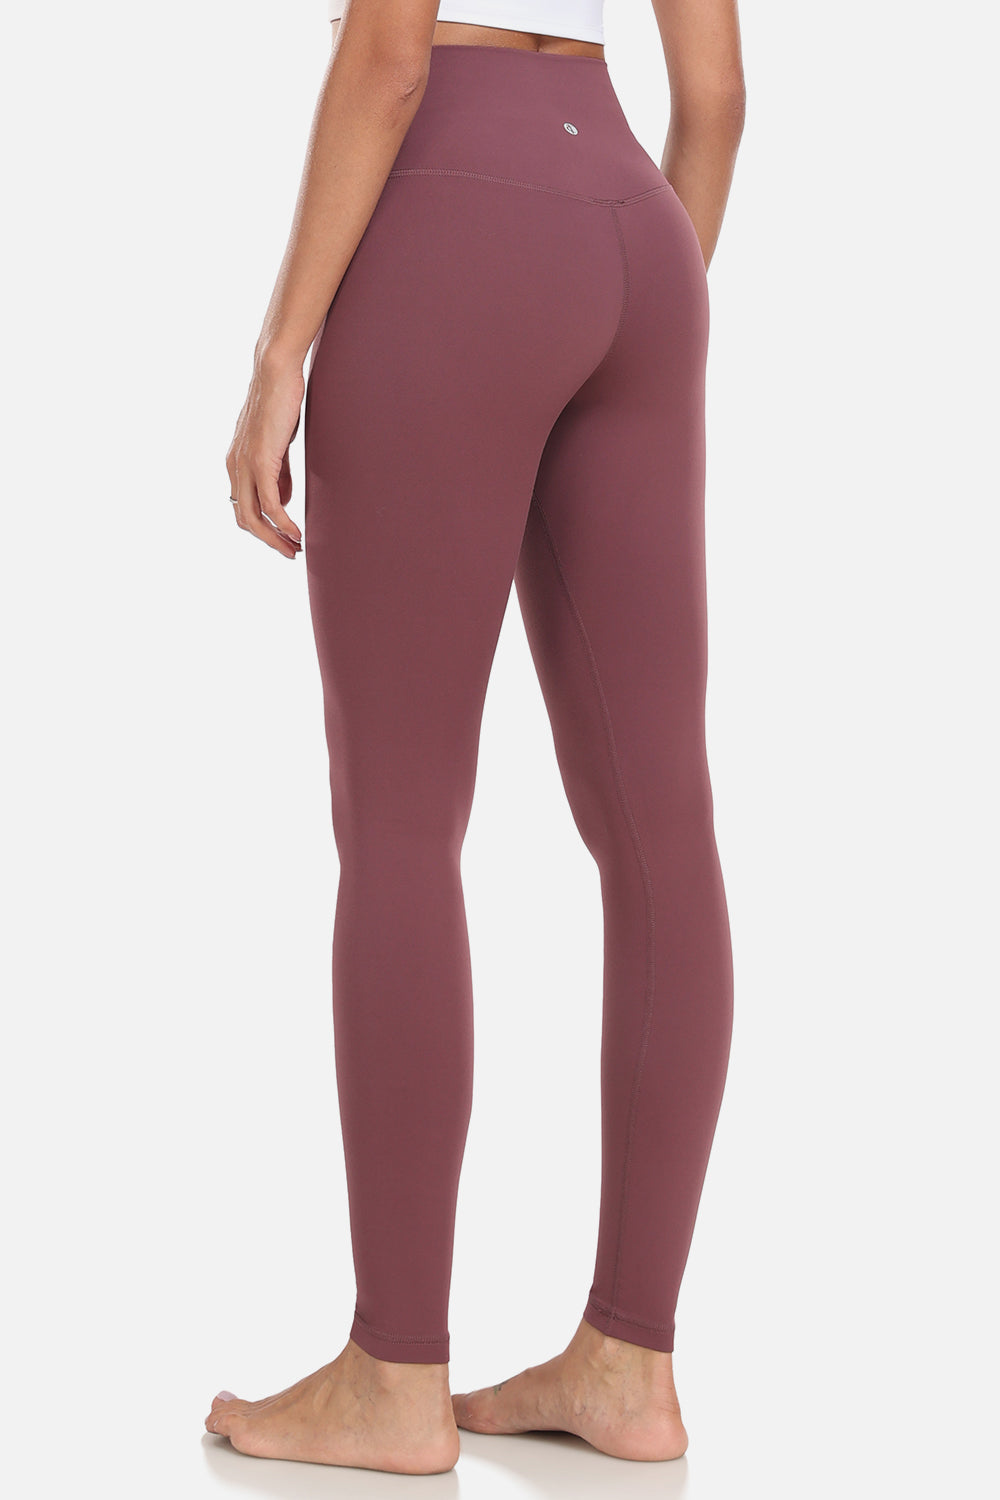 Dreamlux Flared Leggings with Zippered Pockets 29.5 / 31.5